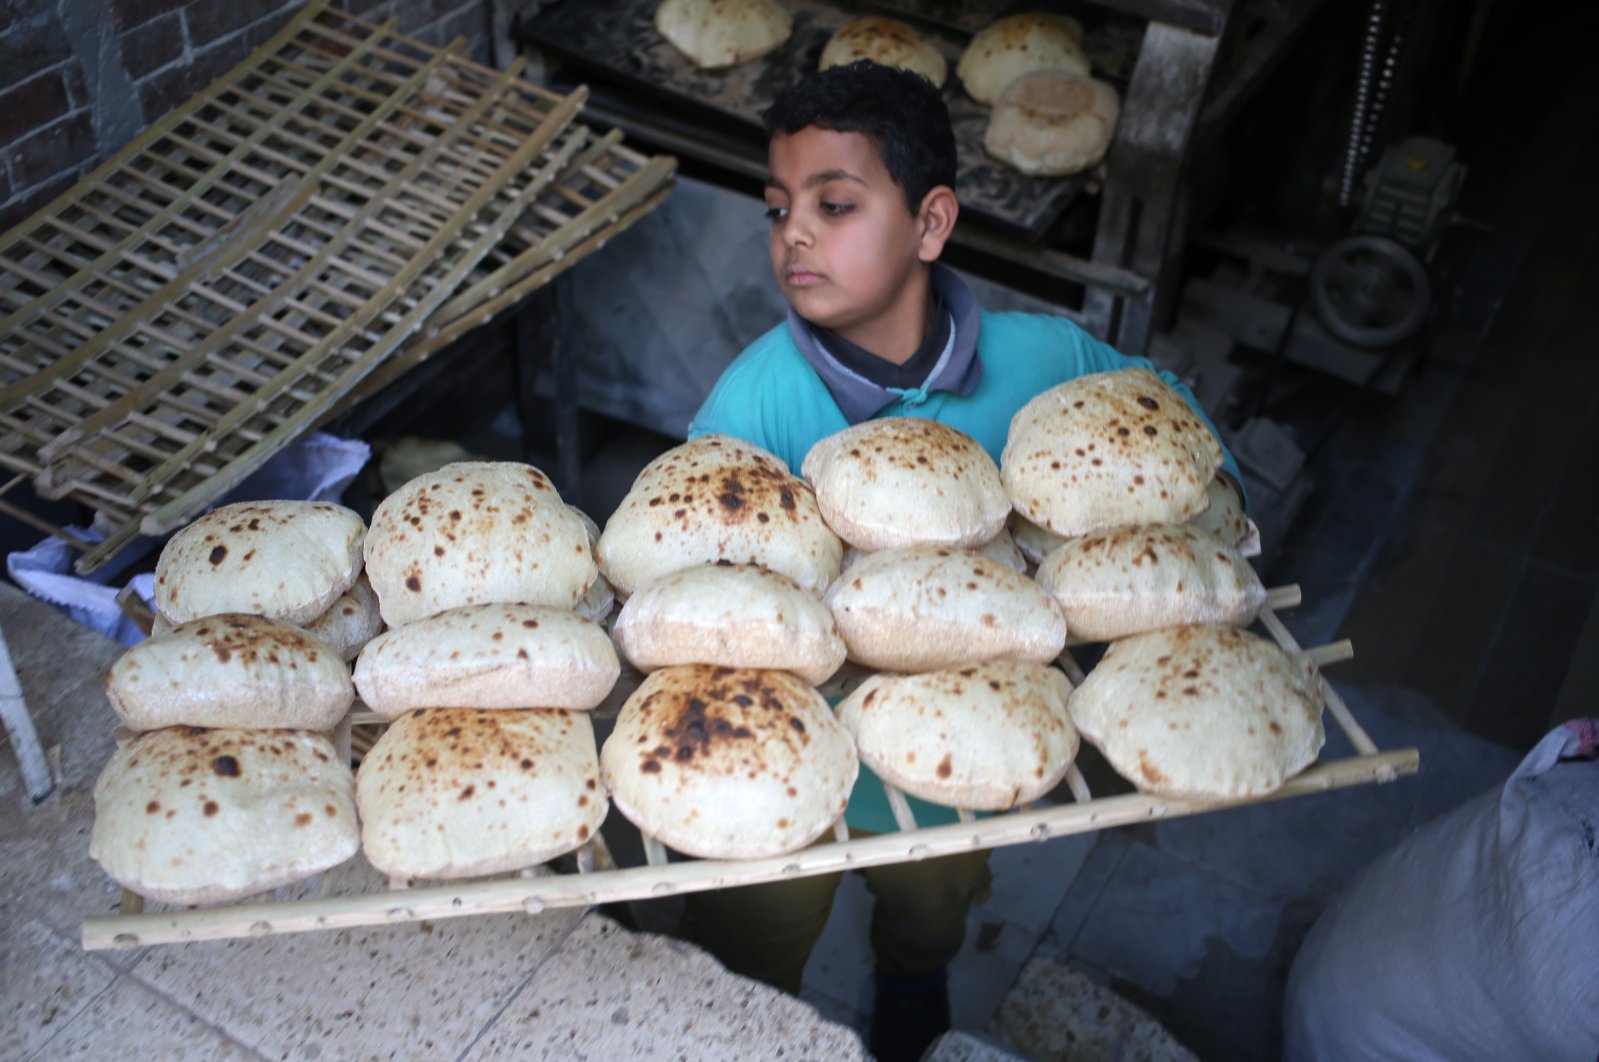 An Egyptian baker carries bread at a bakery in Cairo, Egypt, March 3, 2022. (EPA Photo)